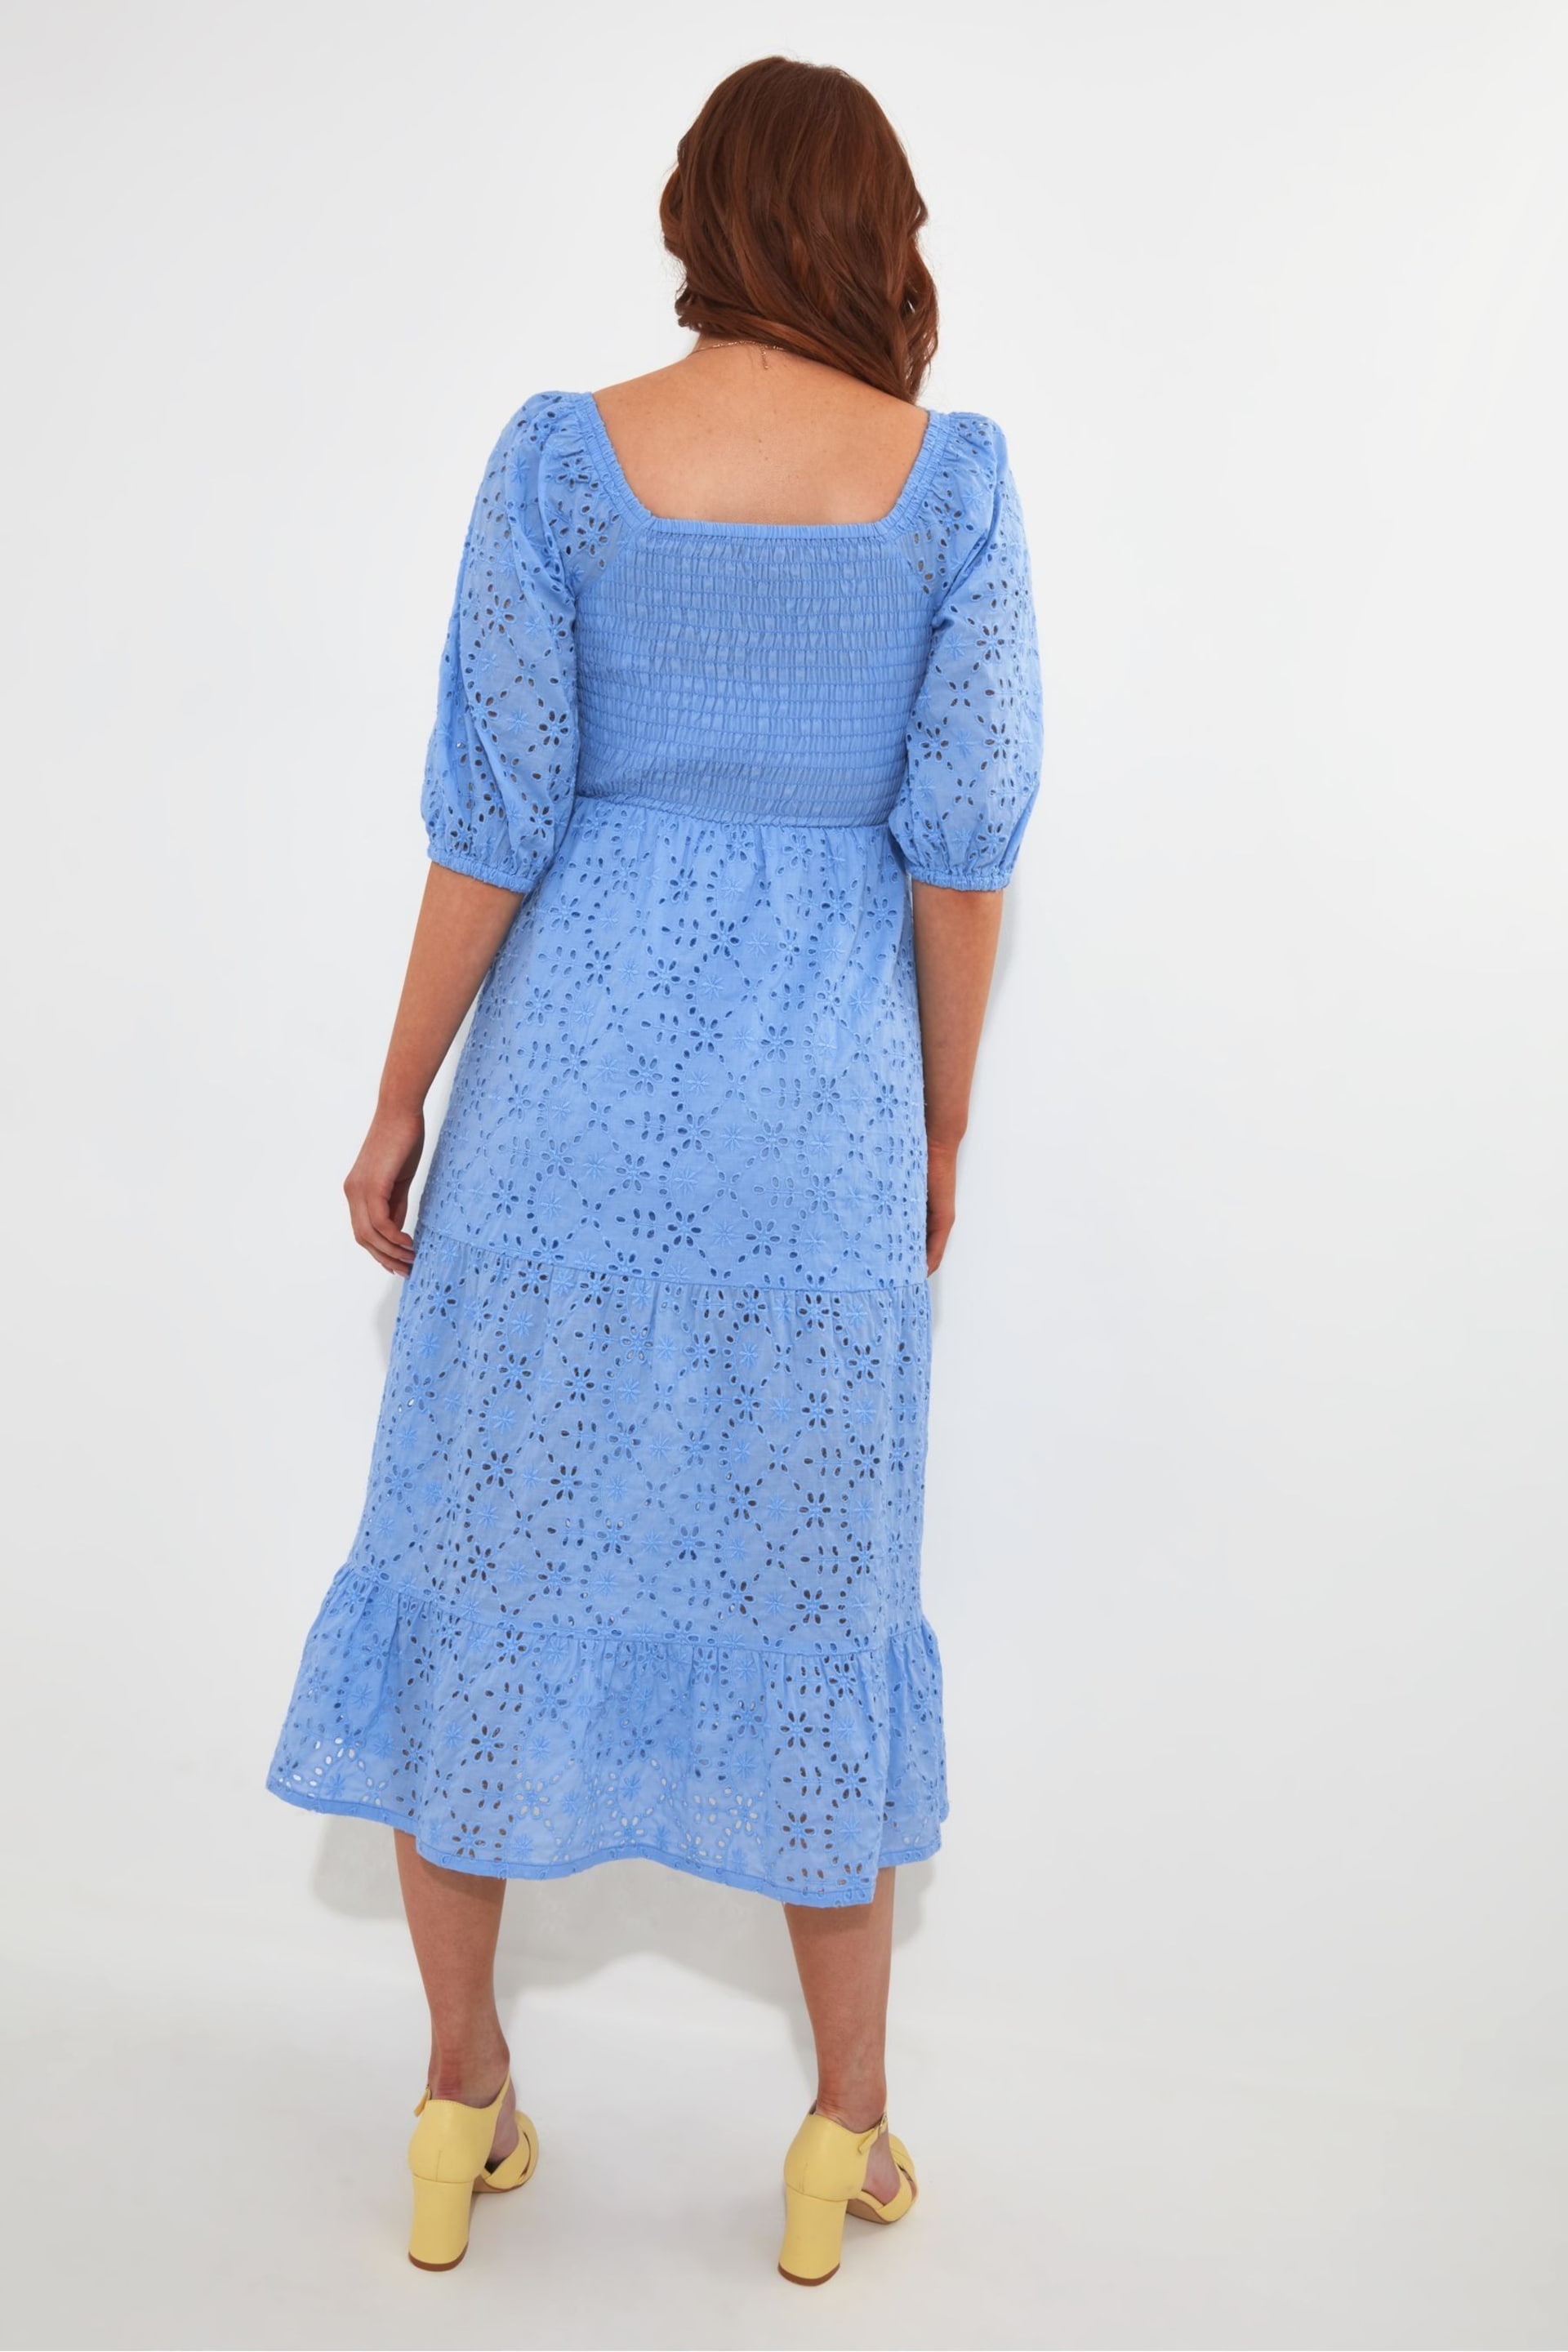 Joe Browns Blue Cotton Broderie Anglaise Puff Sleeve Tiered Midi Dress - Image 3 of 7